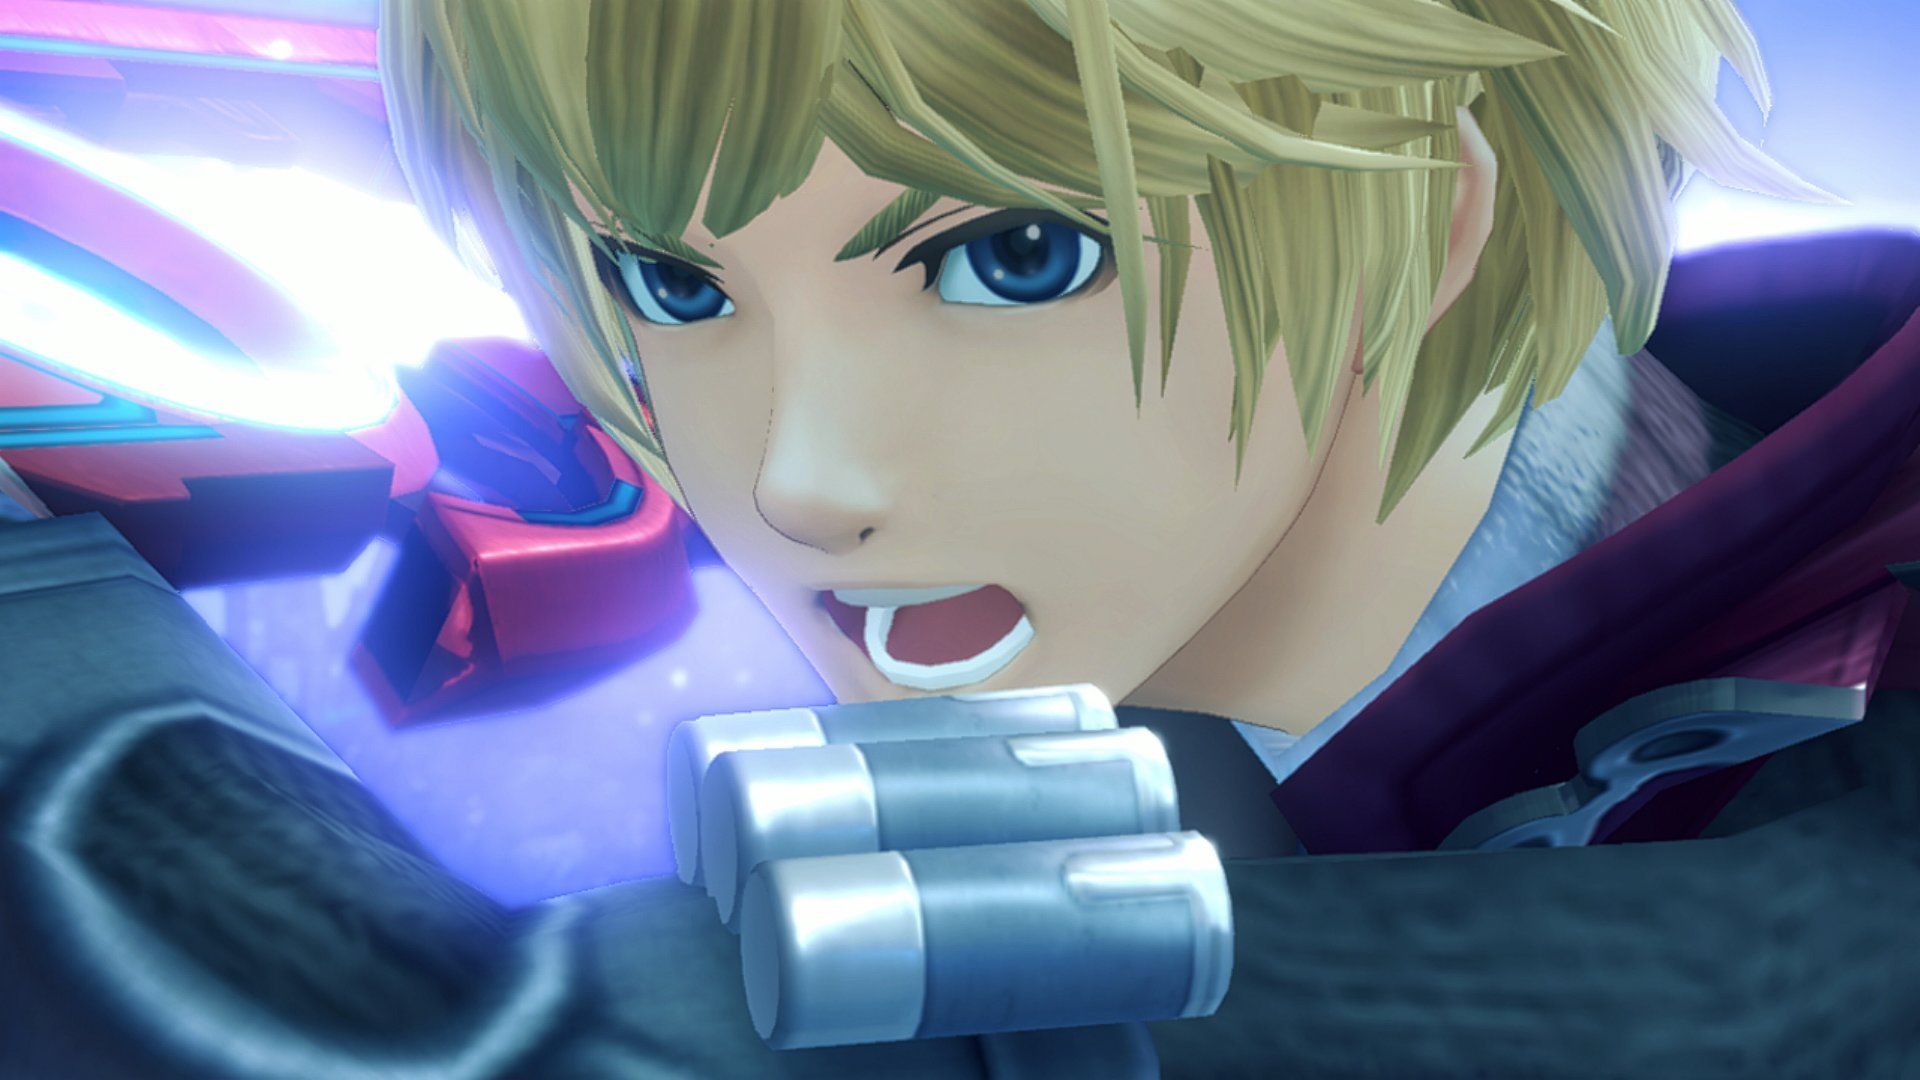 Japan: New promotional trailer for Xenoblade Chronicles